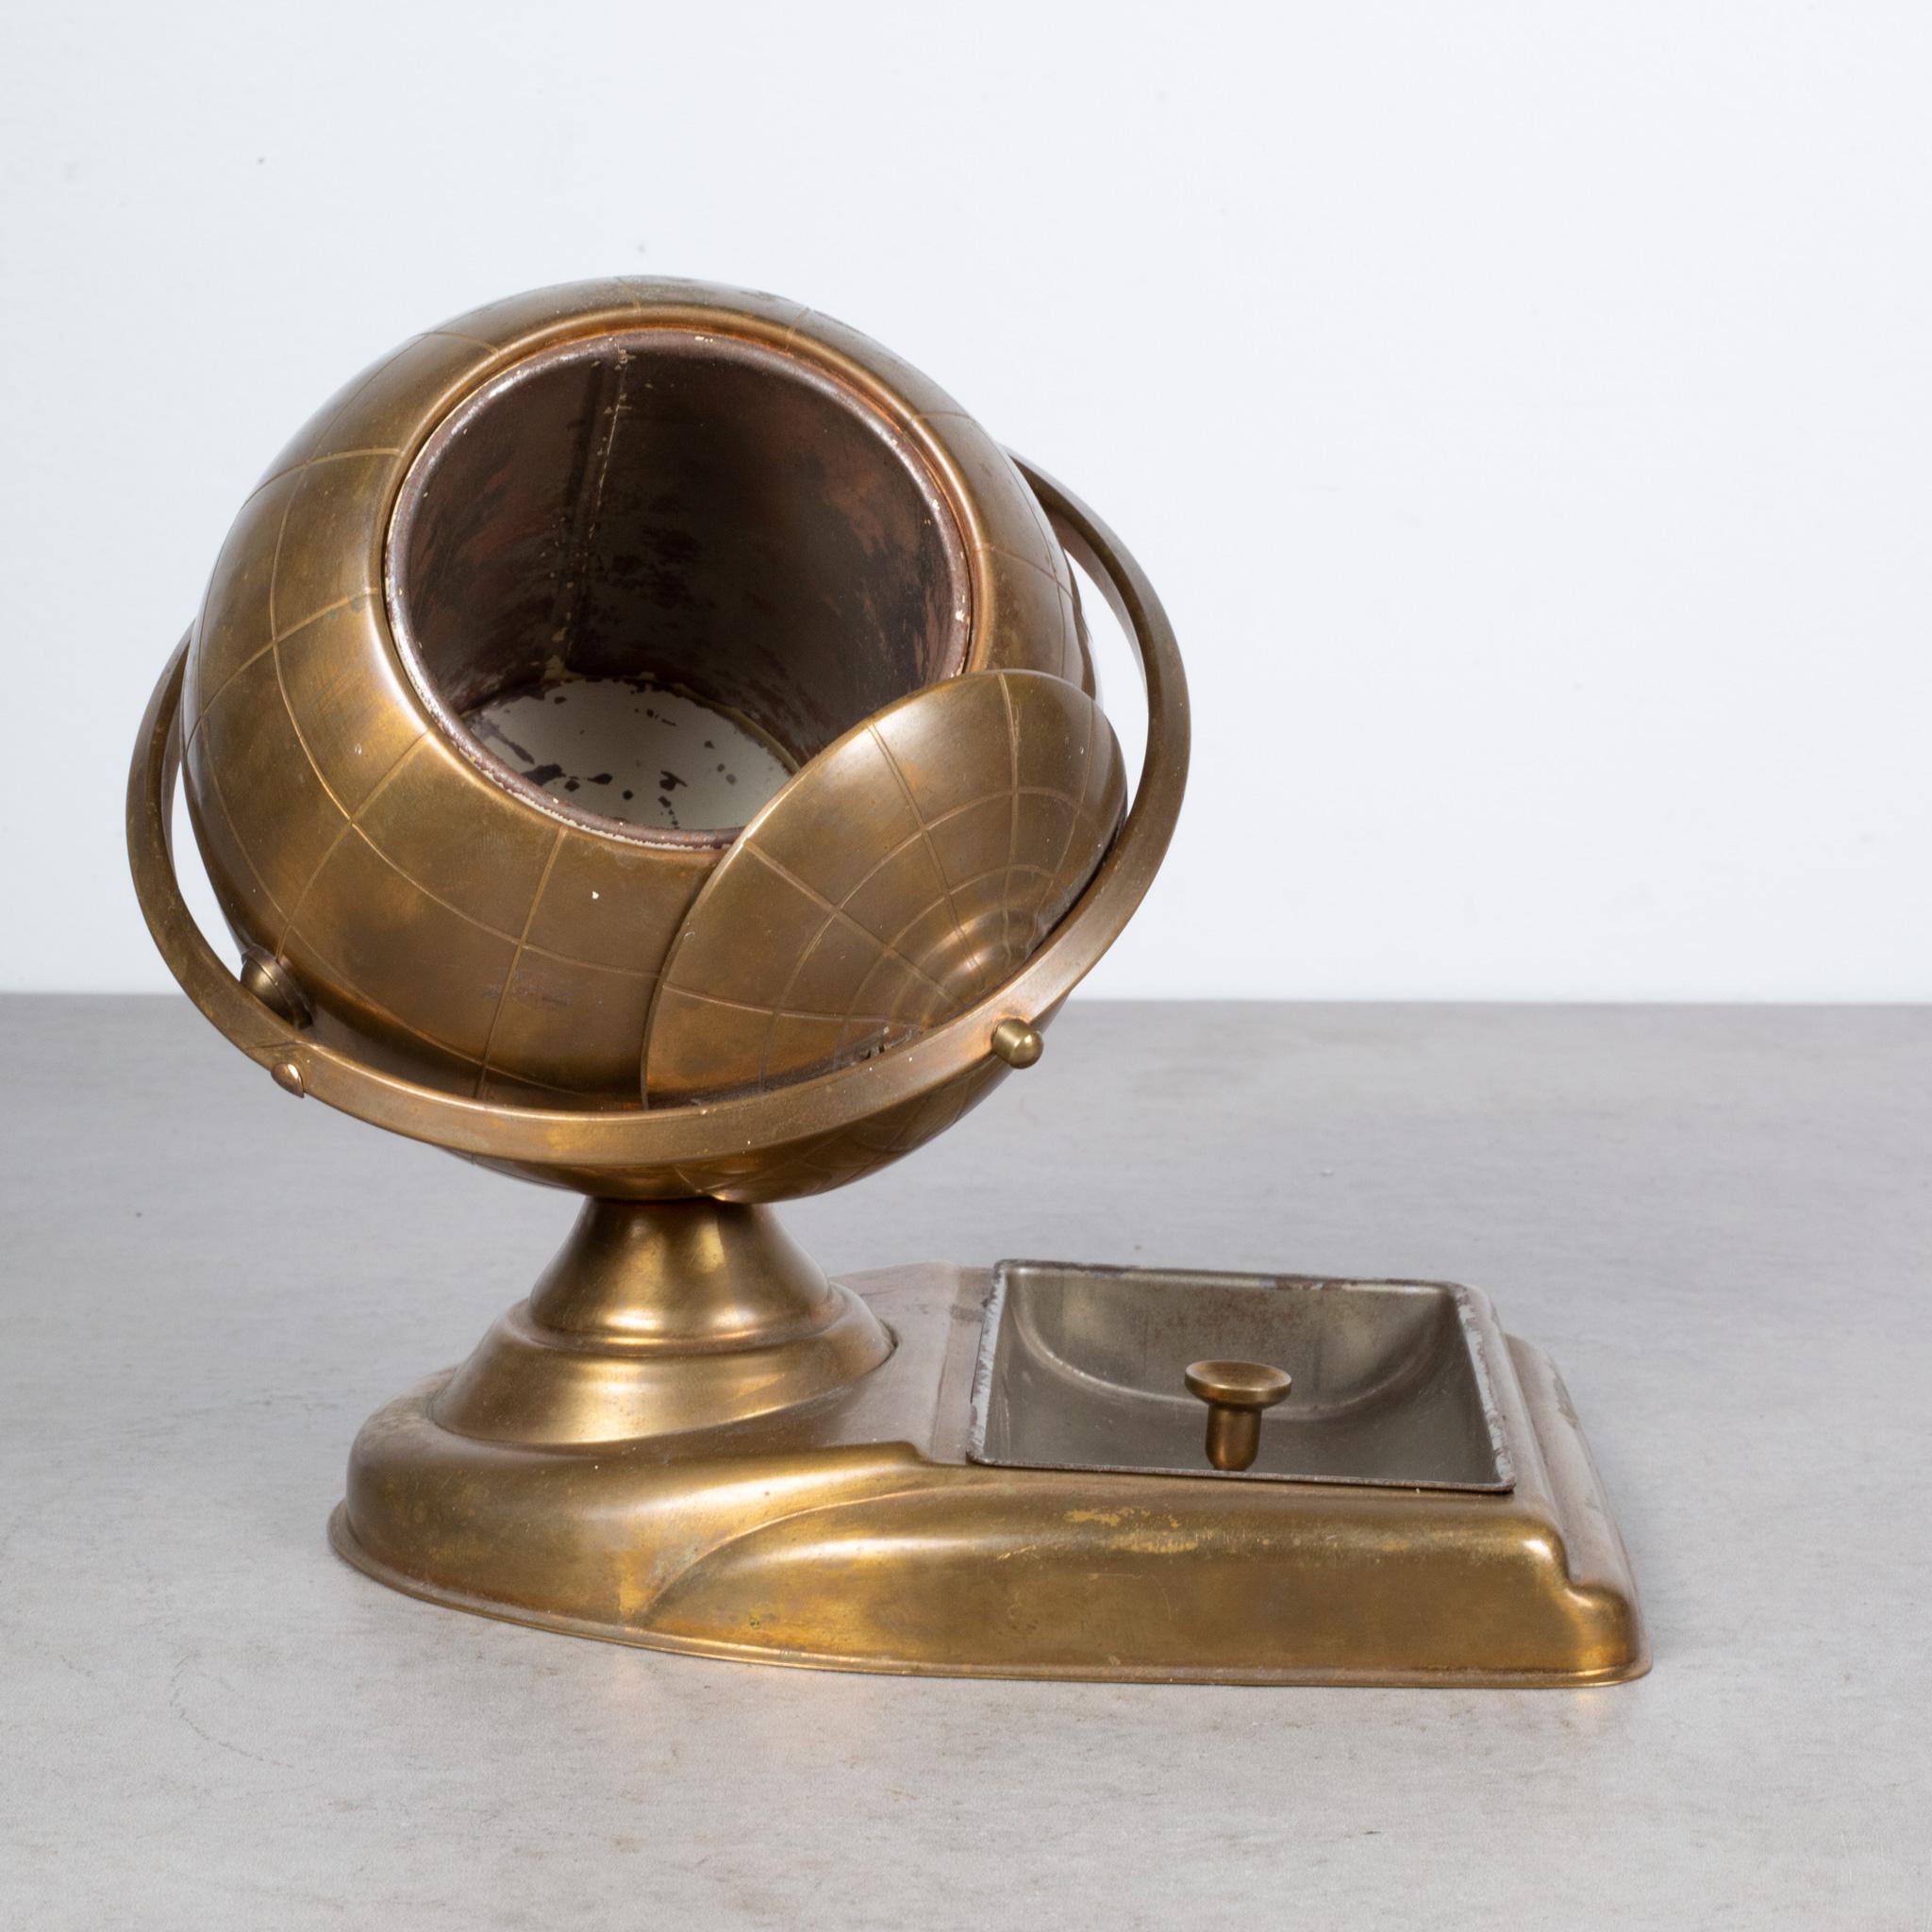 About

An original midcentury brass cigarette holder and ashtray or coin dish. The lid slides open on the globe's axis to reveal a metal interior designed to hold cigarettes. This globe is unique because it has an attached tray.

Creator: